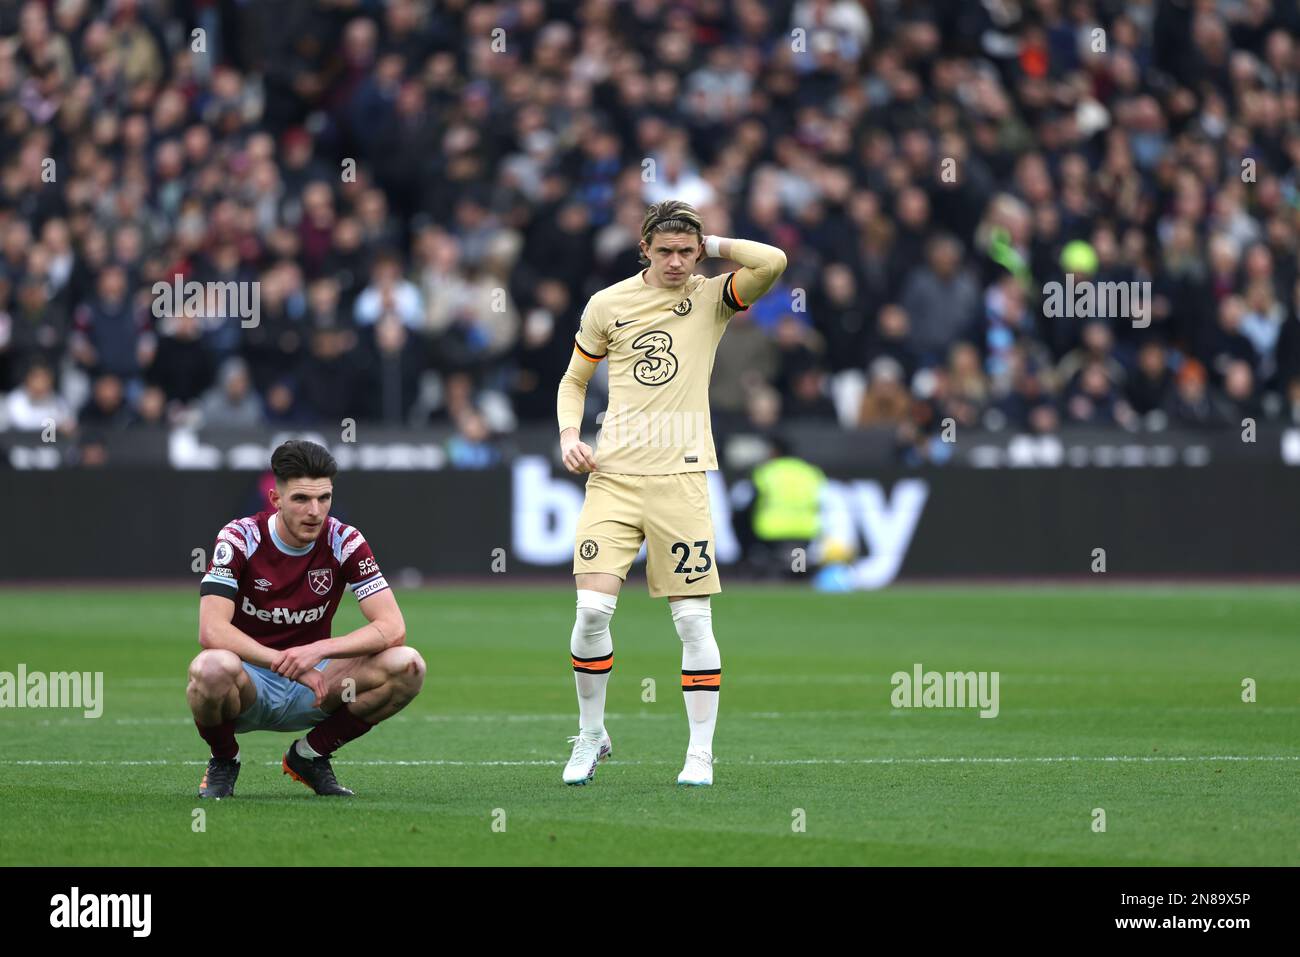 London, UK. 11th Feb, 2023. Declan Rice (WHU) and Conor Gallagher (C) at the West Ham United v Chelsea EPL match, at the London Stadium, London, UK on February 11, 2023. Credit: Paul Marriott/Alamy Live News Stock Photo